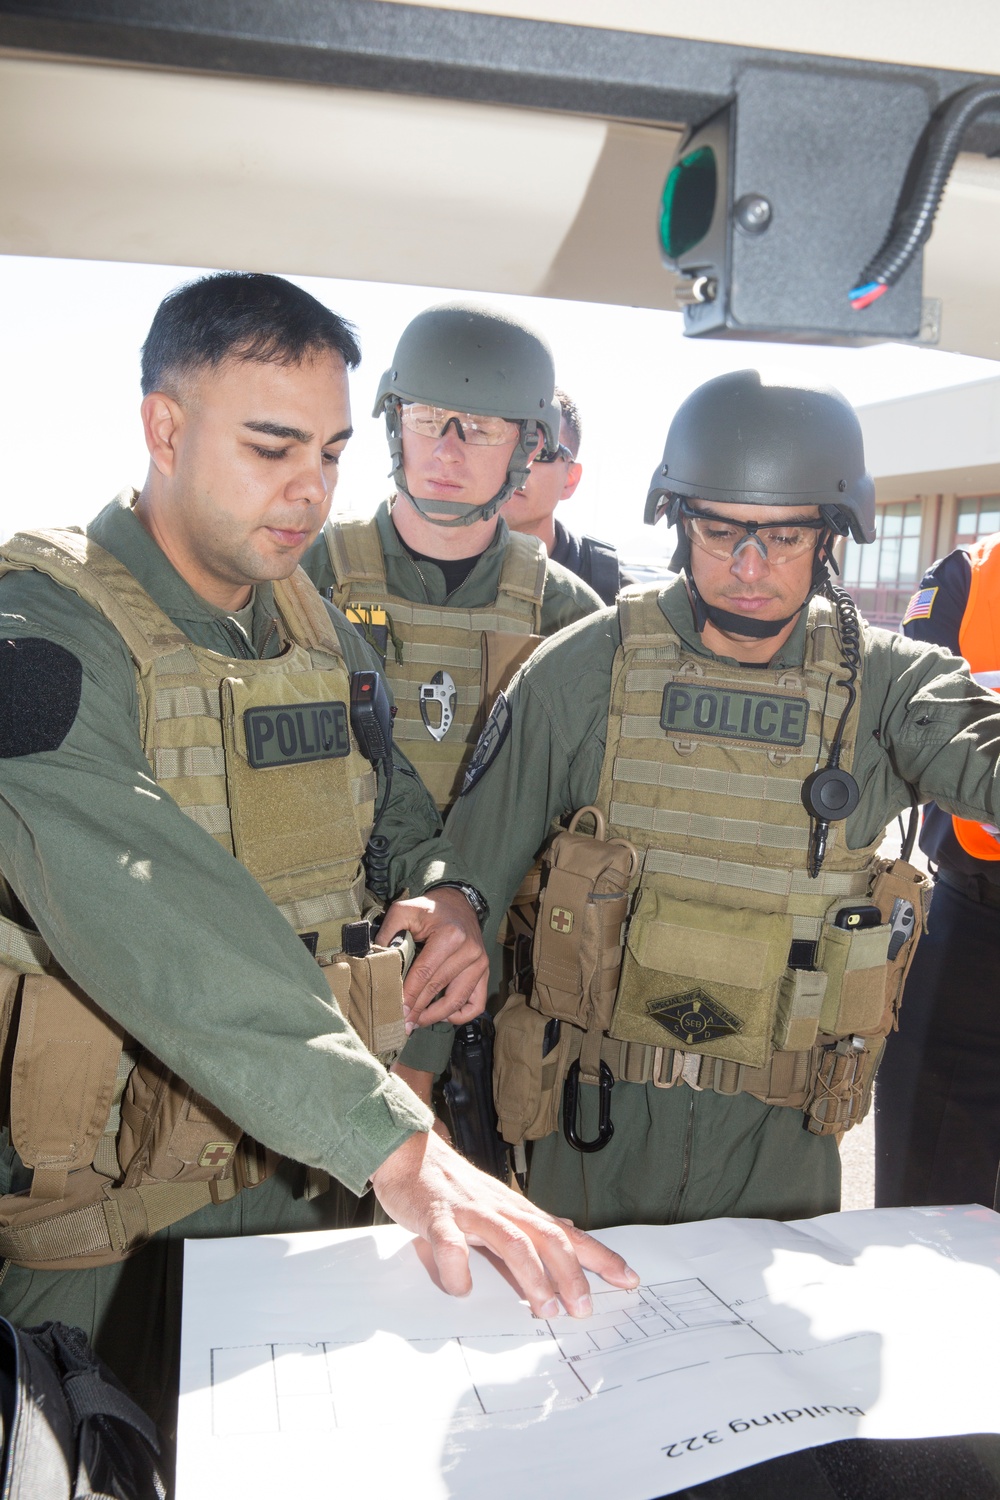 Active Shooter Exercise aboard Marine Corps Logistics Base Barstow